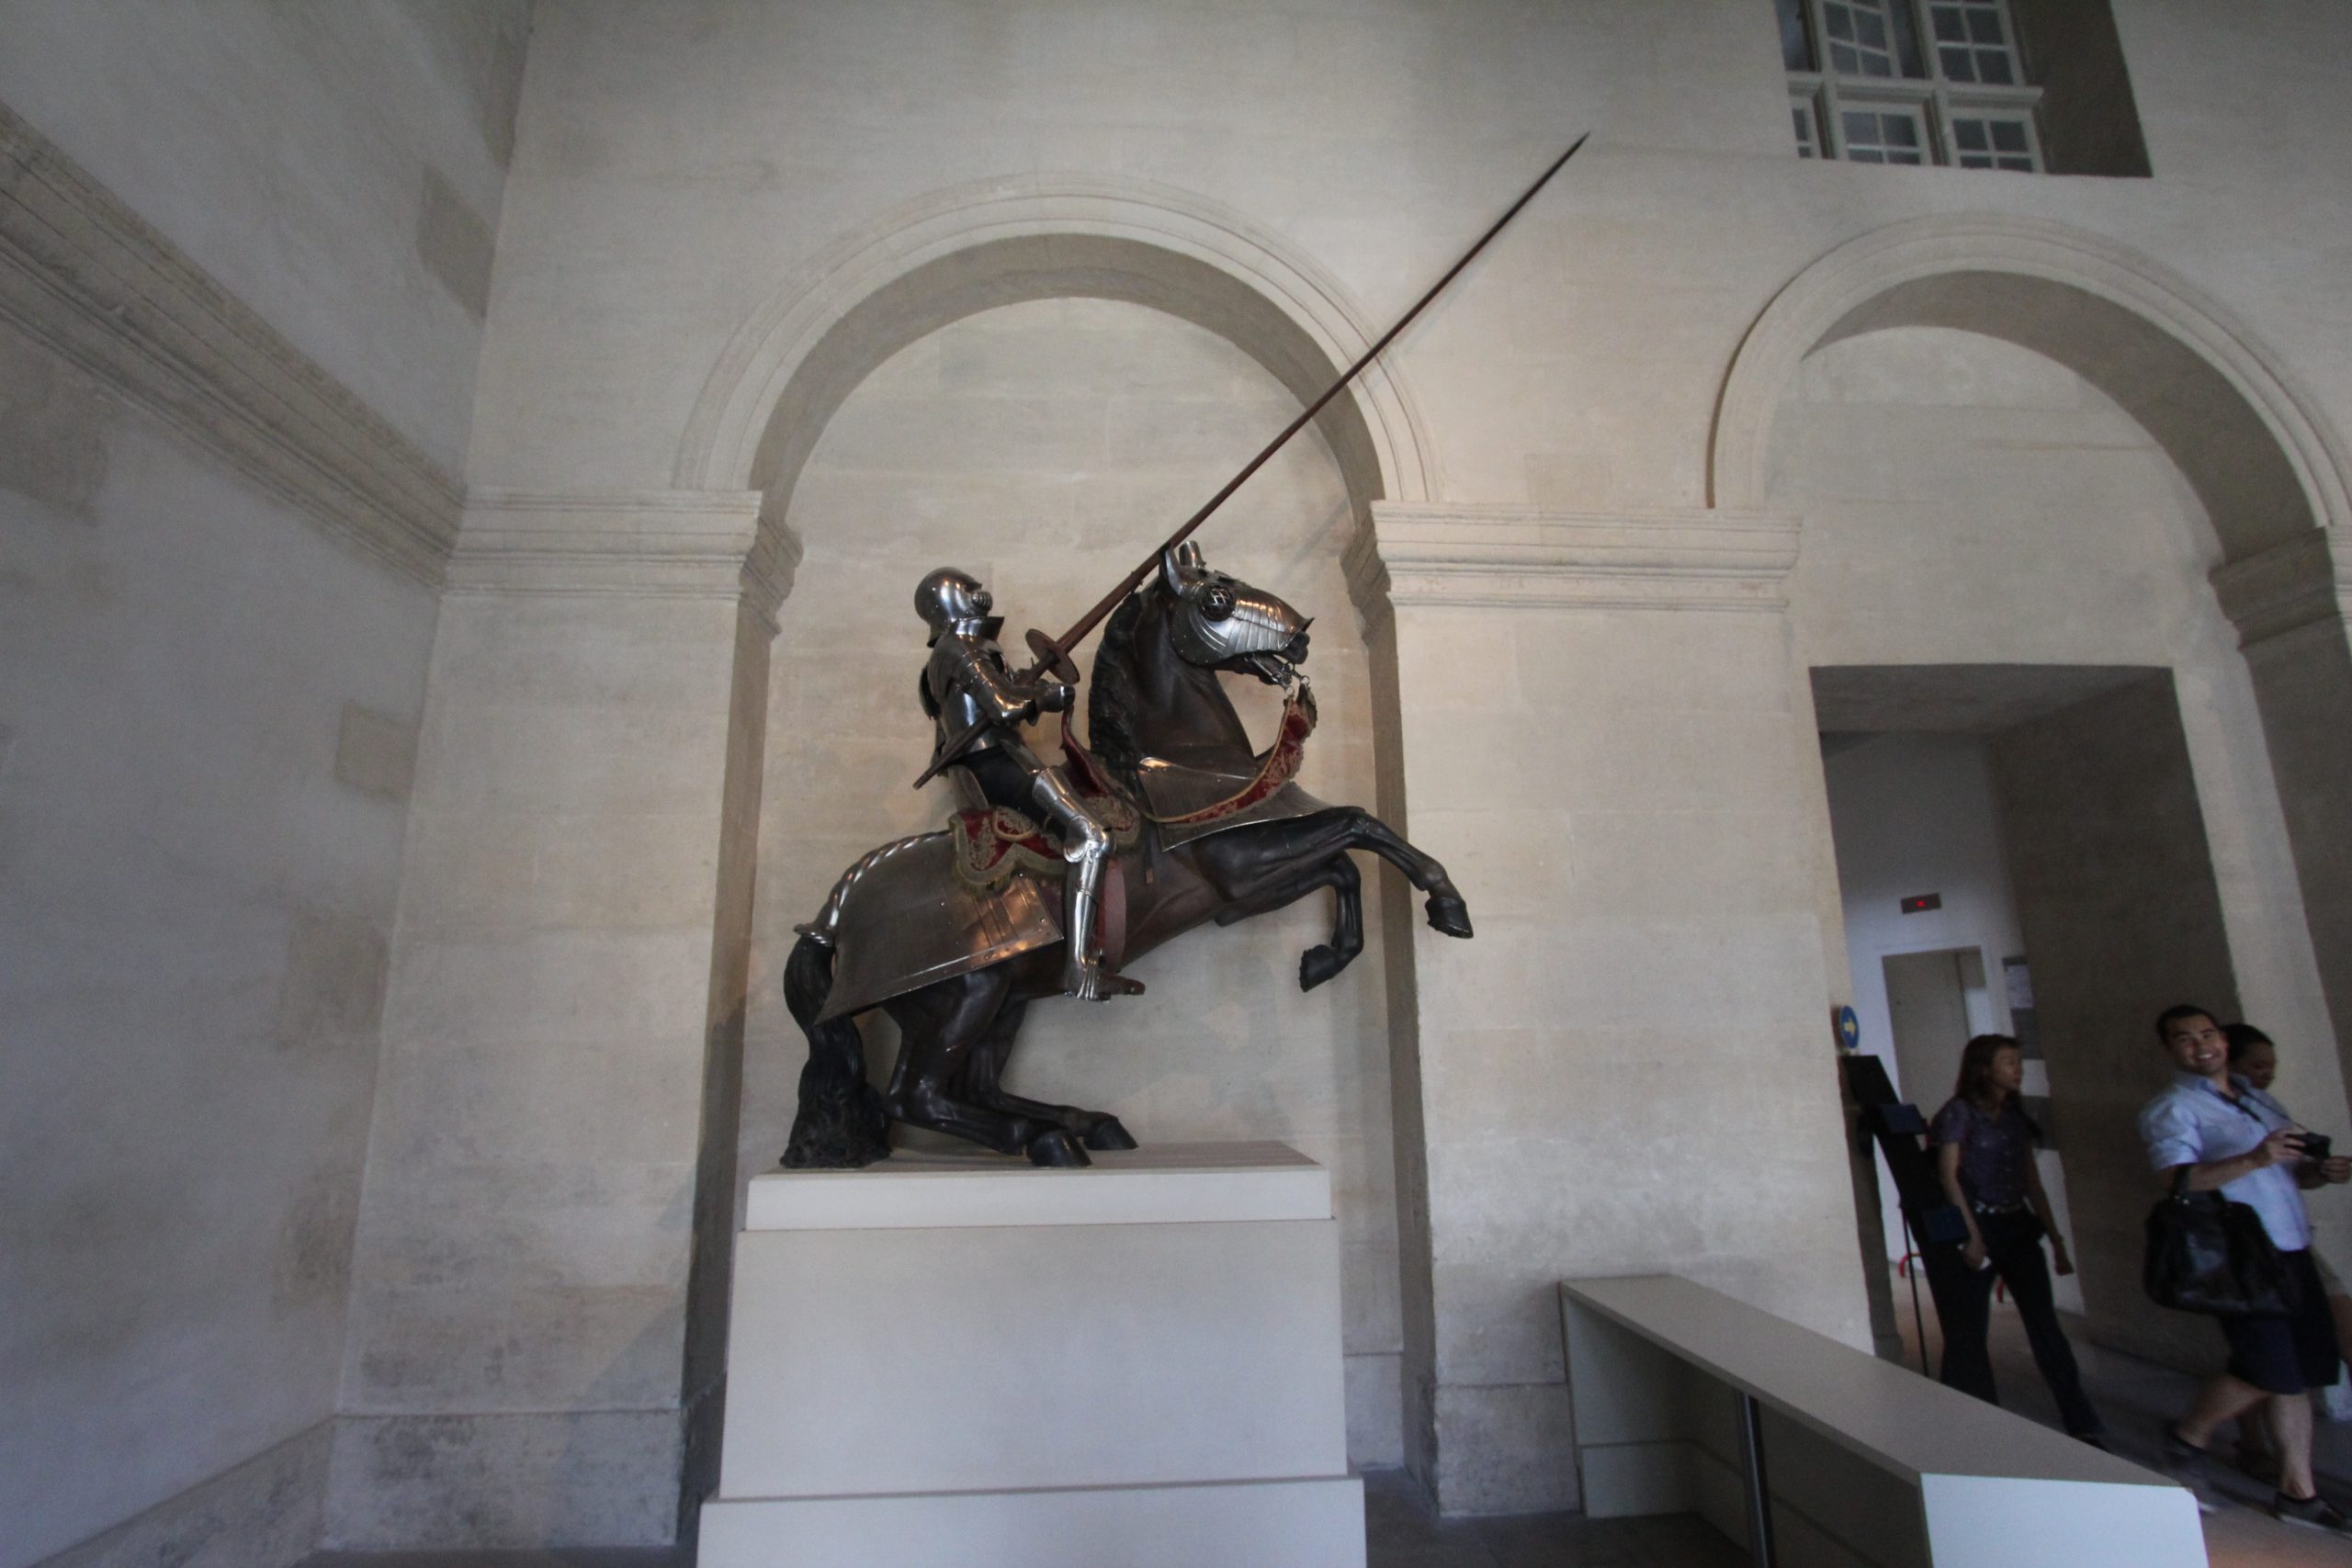 Agincourt: It was the battle where English longbow archers won against heavily-armoured French cavalry stuck in mud